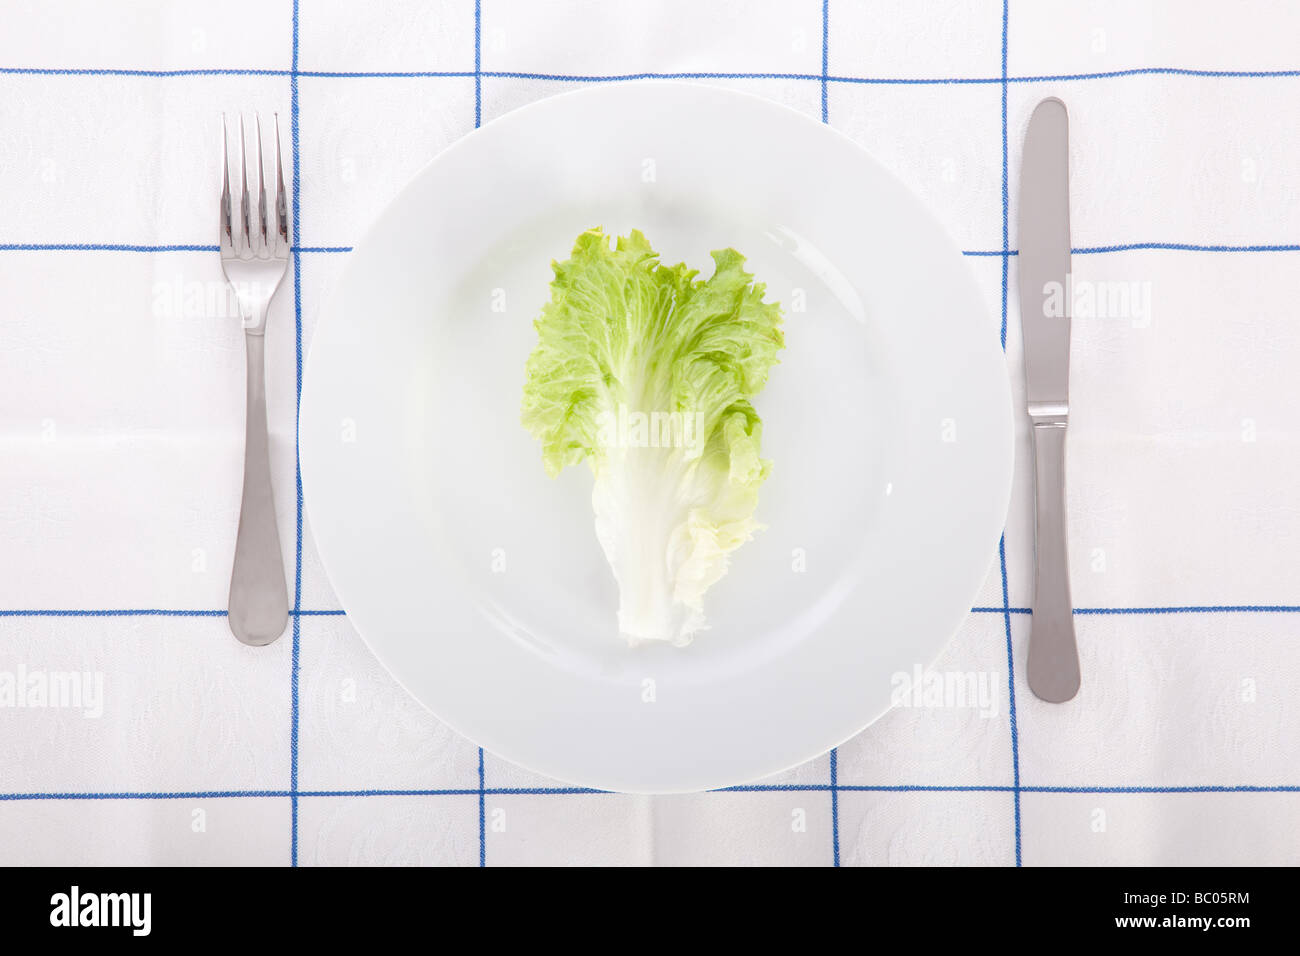 Concept for diet with a lettuce leaf on a dish Stock Photo